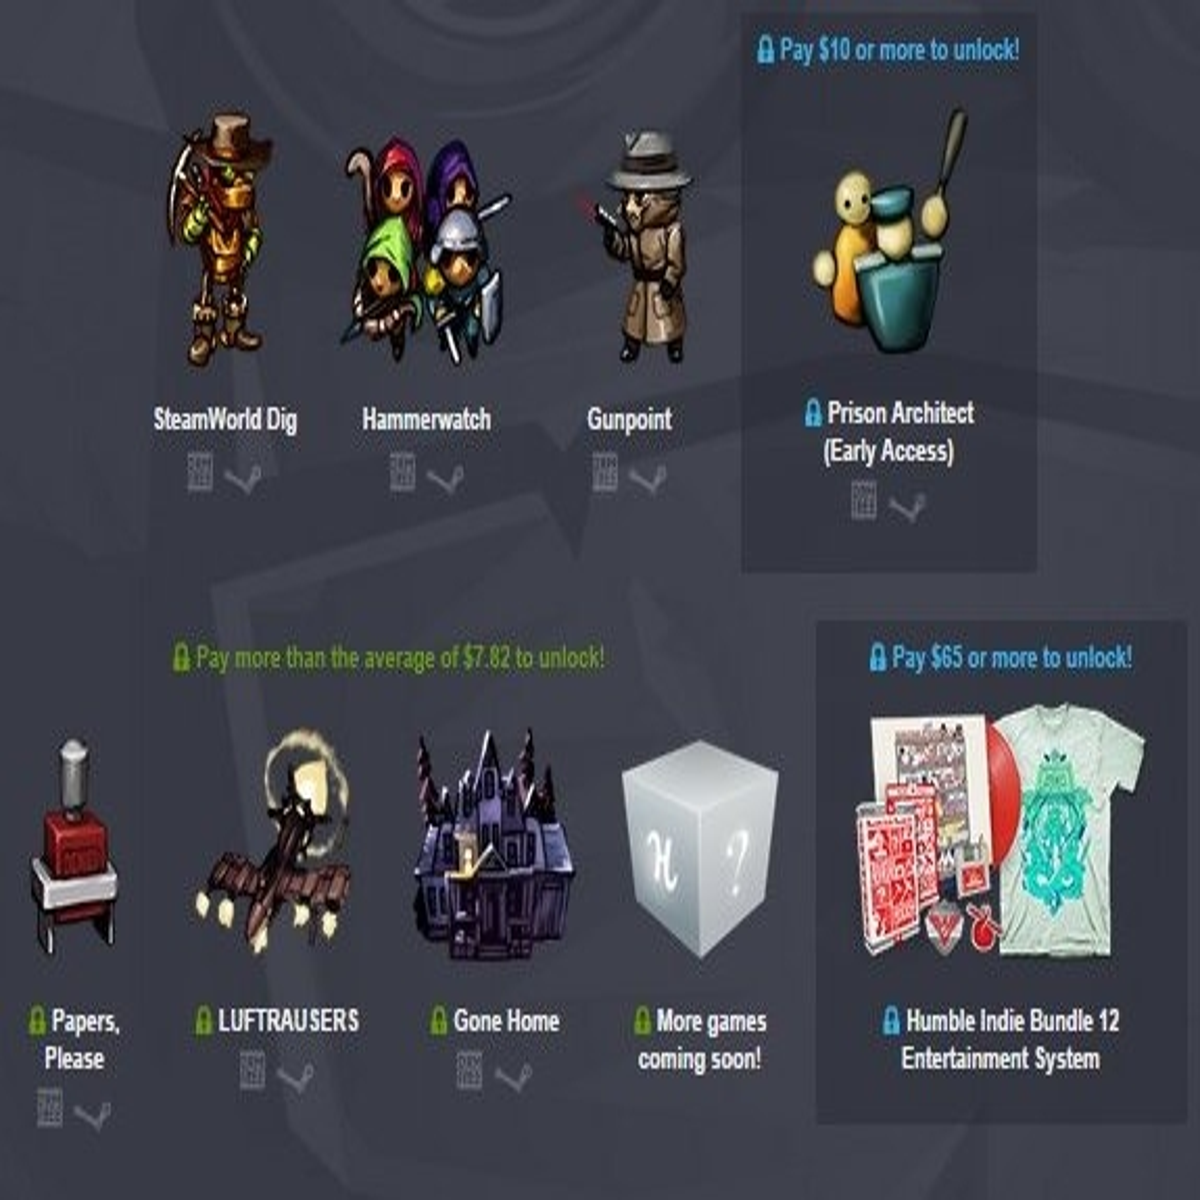 The latest Humble Choice bundle has landed and it's indie games galore